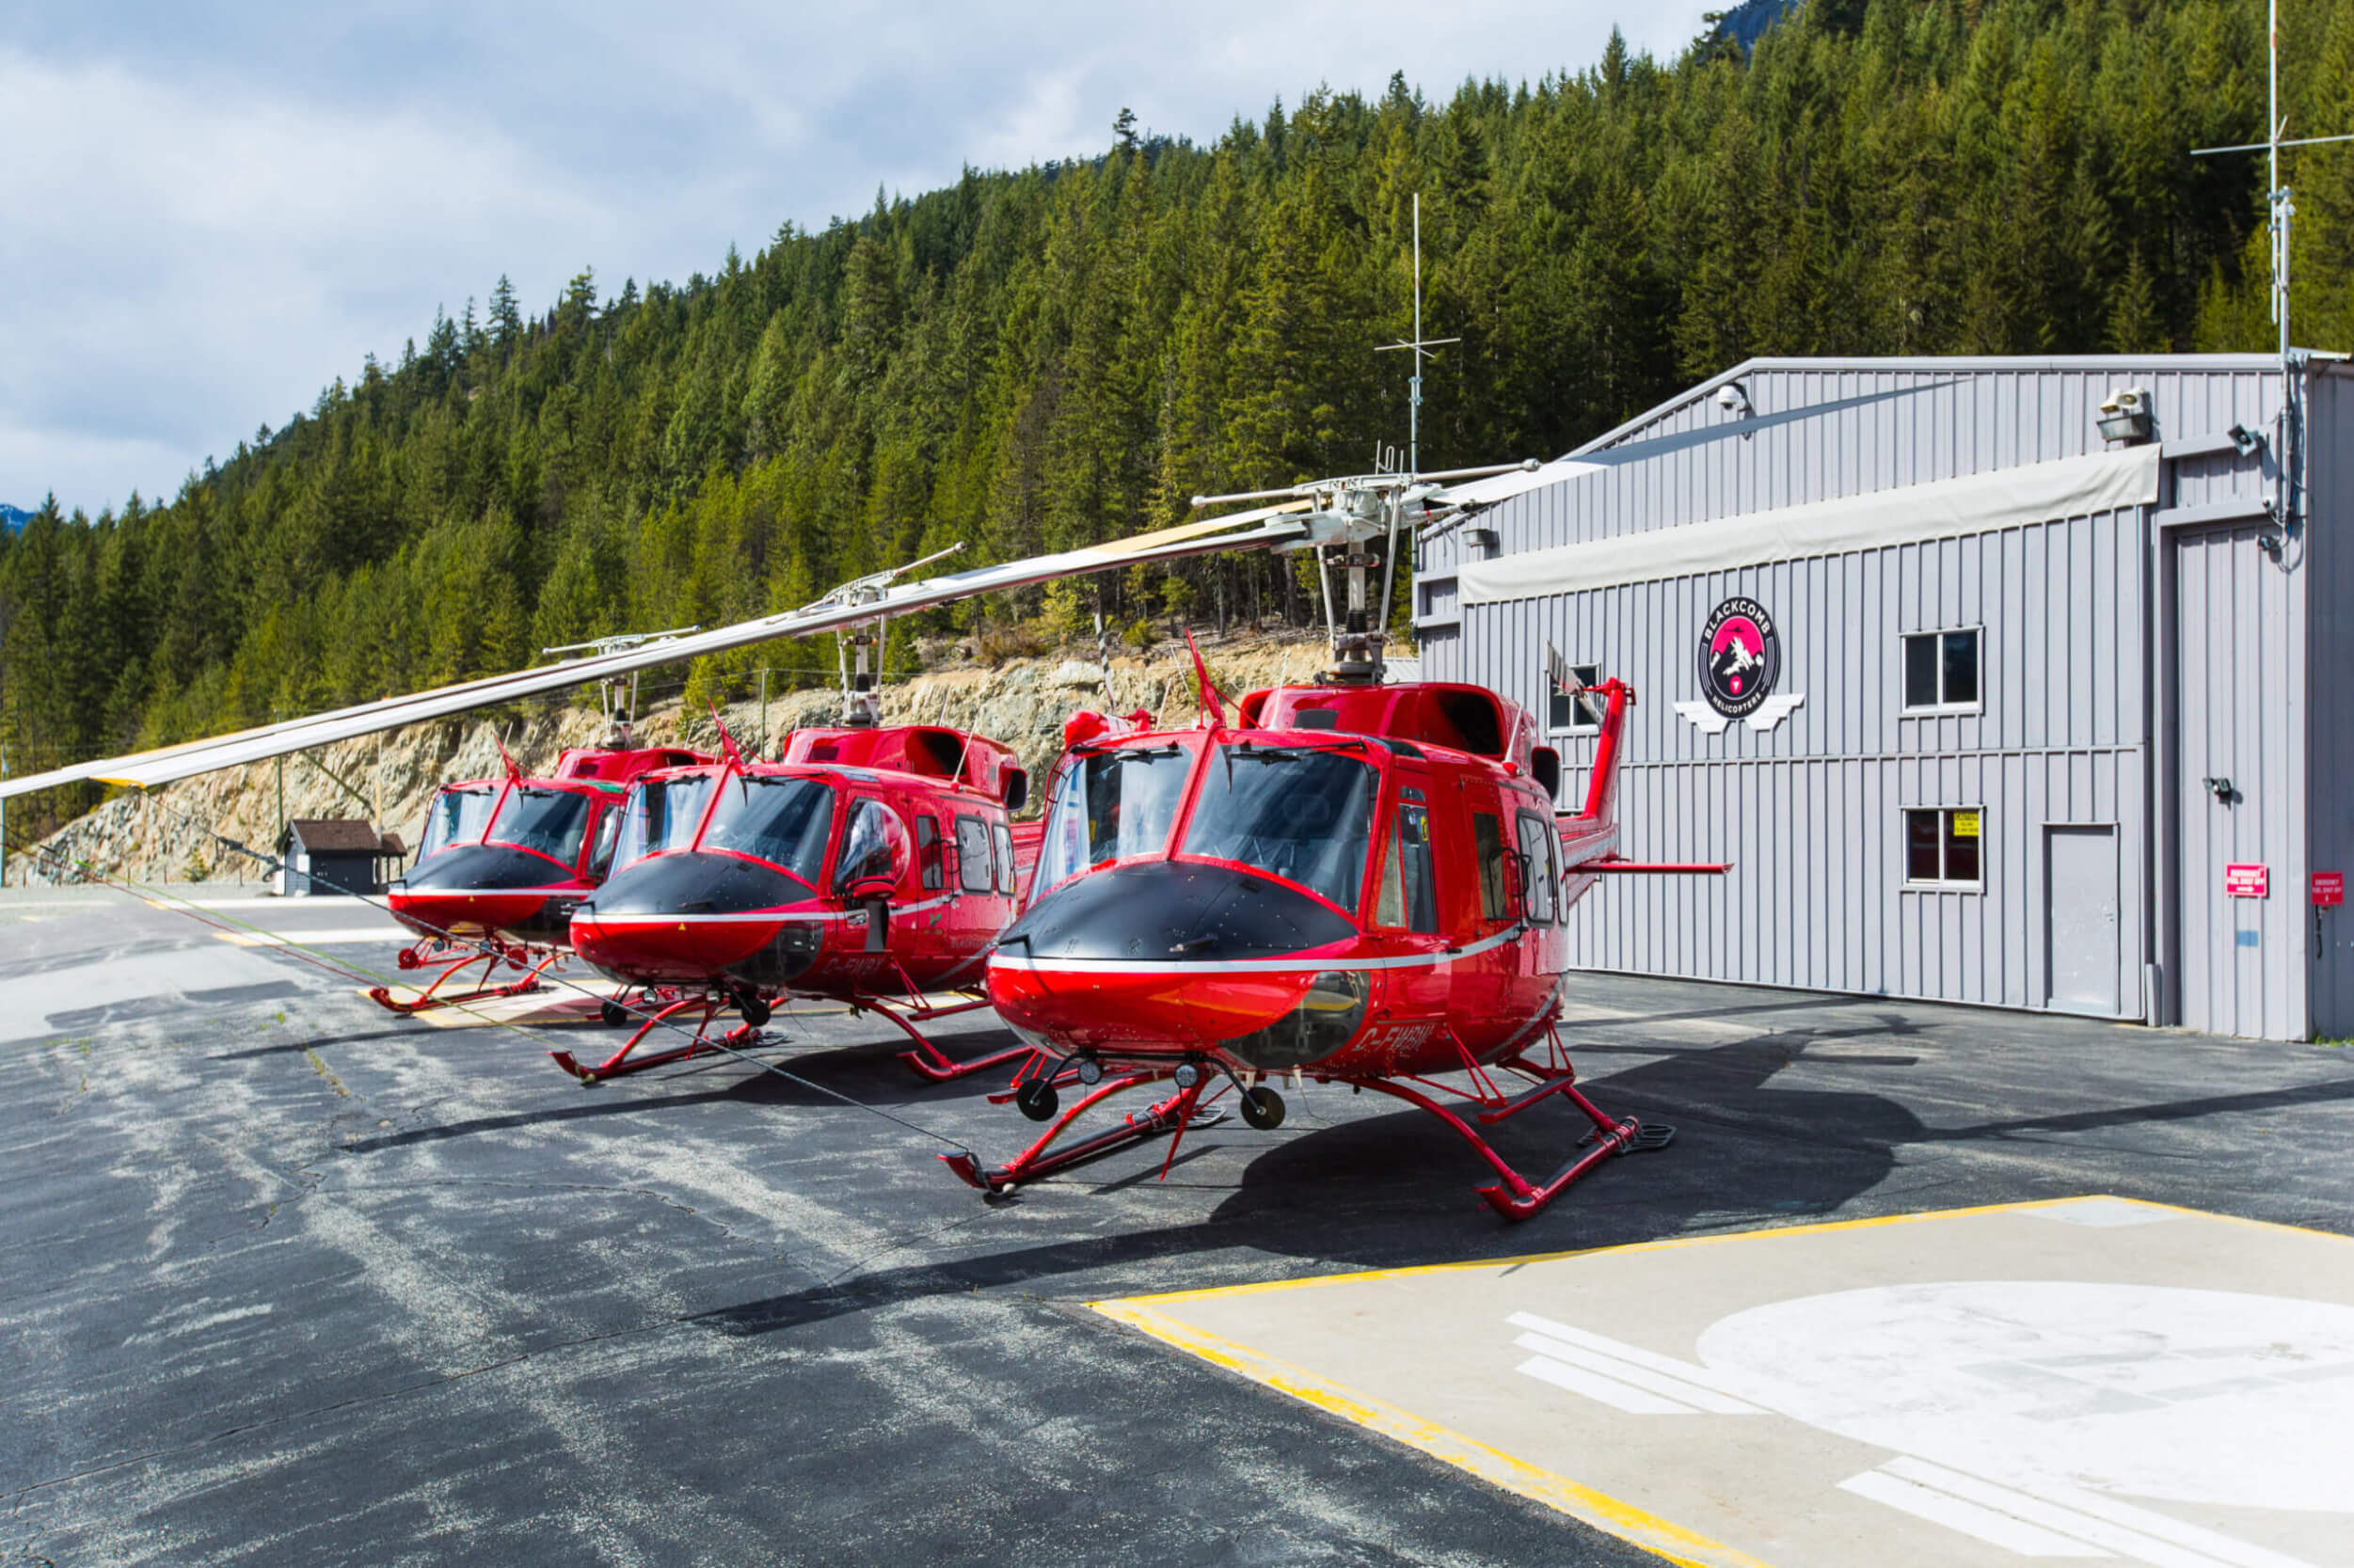 a row of helicopters on the ground with a mountain in the background